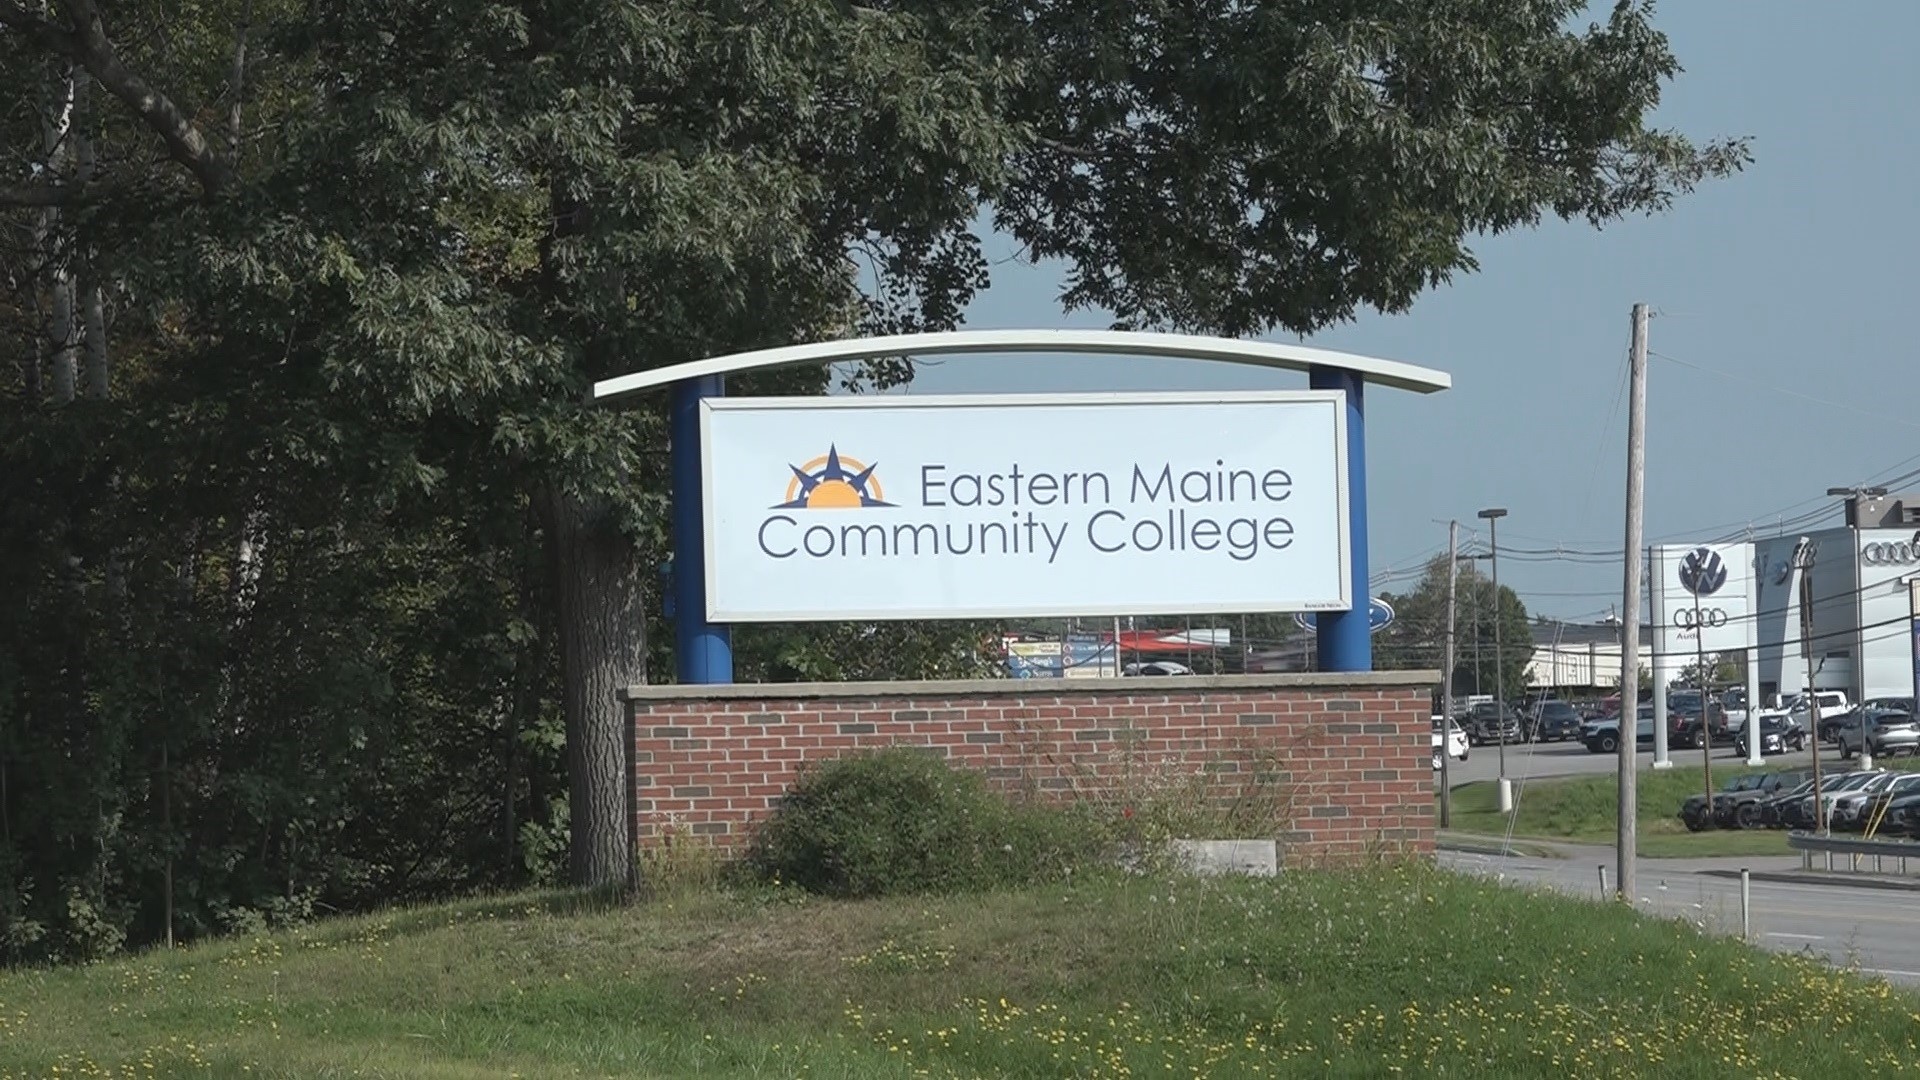 One community college saw an increase as high as 26 percent.